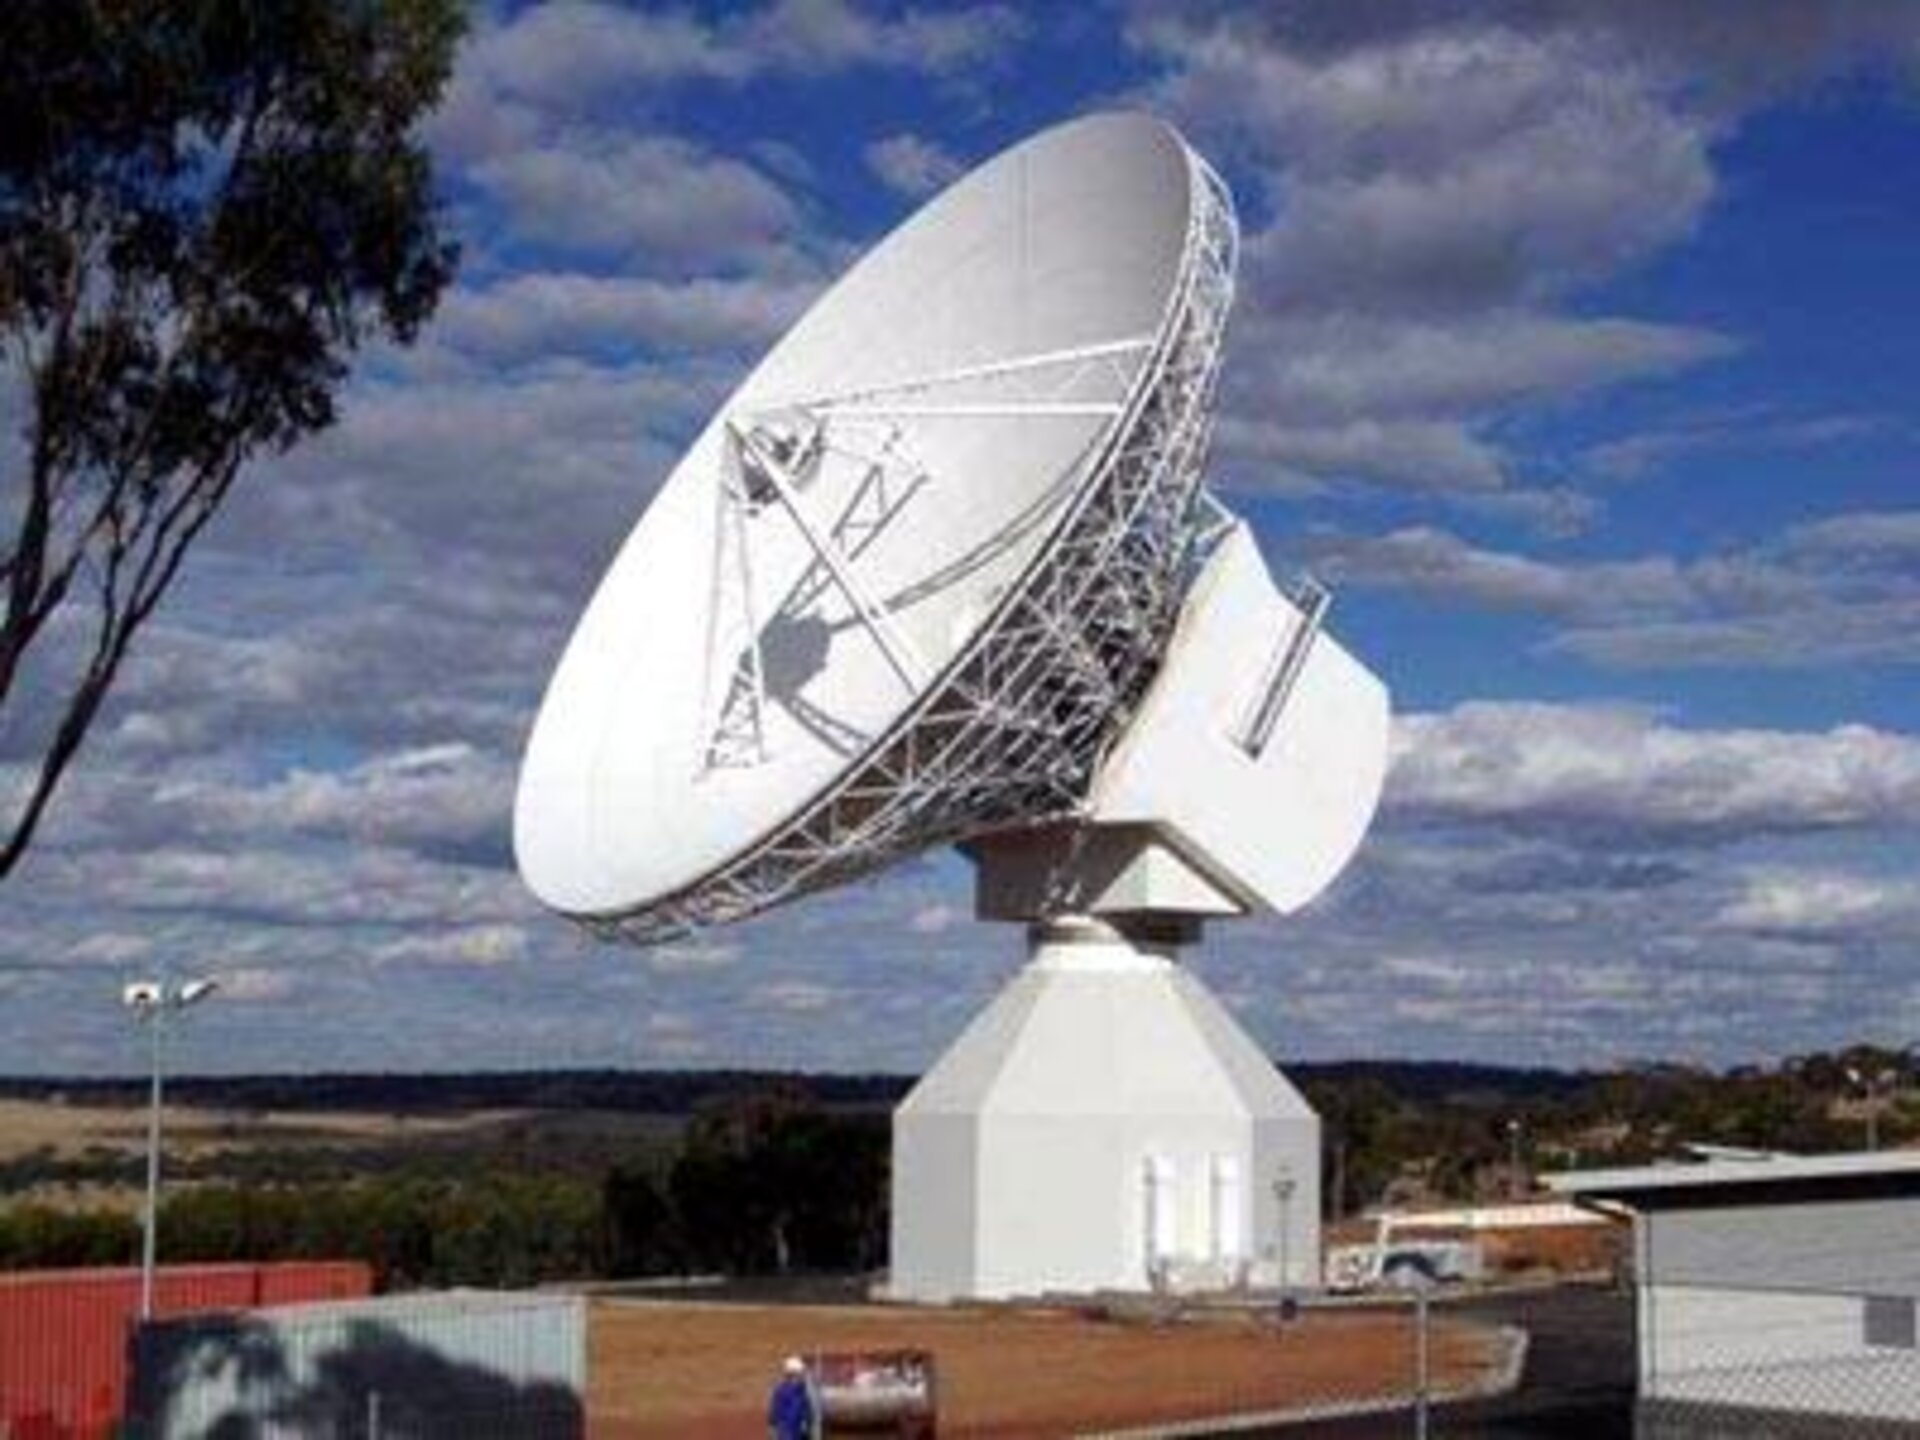 ESA's 35m deep space station at New Norcia